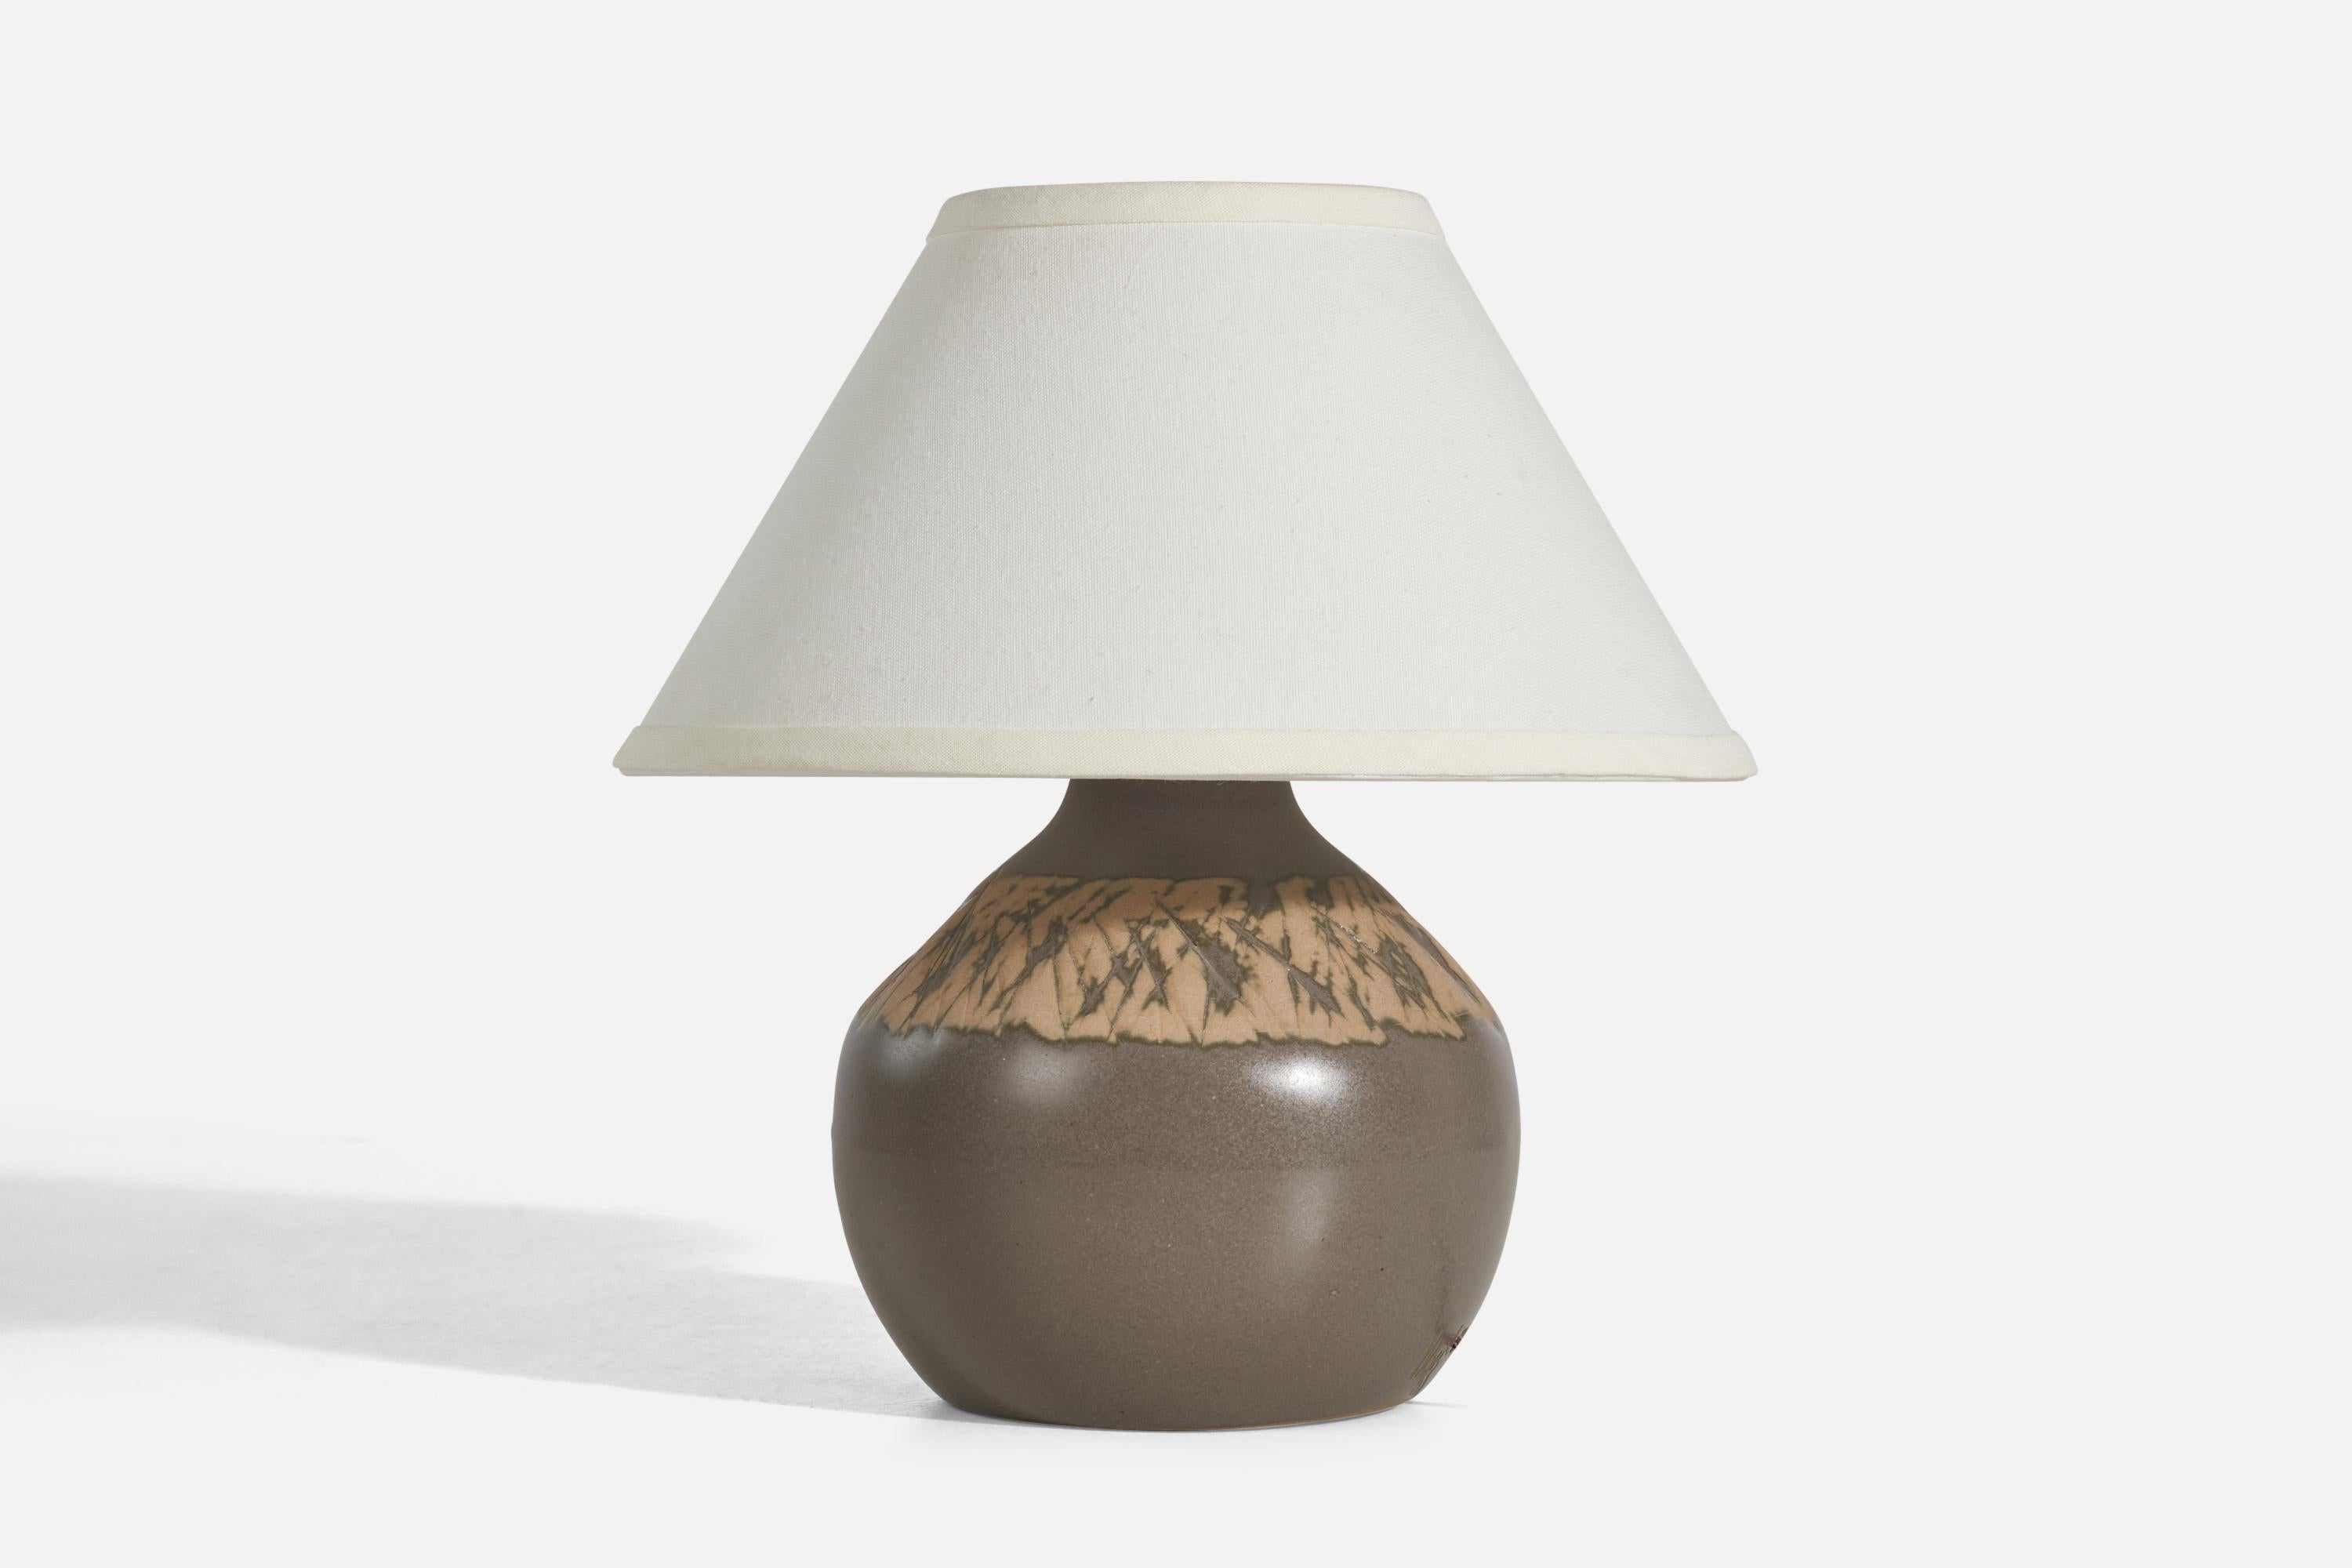 A brown ceramic table lamp designed by Jane & Gordon Martz and produced by Marshall Studios, Indianapolis, 1950s. 

Sold without lampshade. Stated measurements are excluding lampshade.
